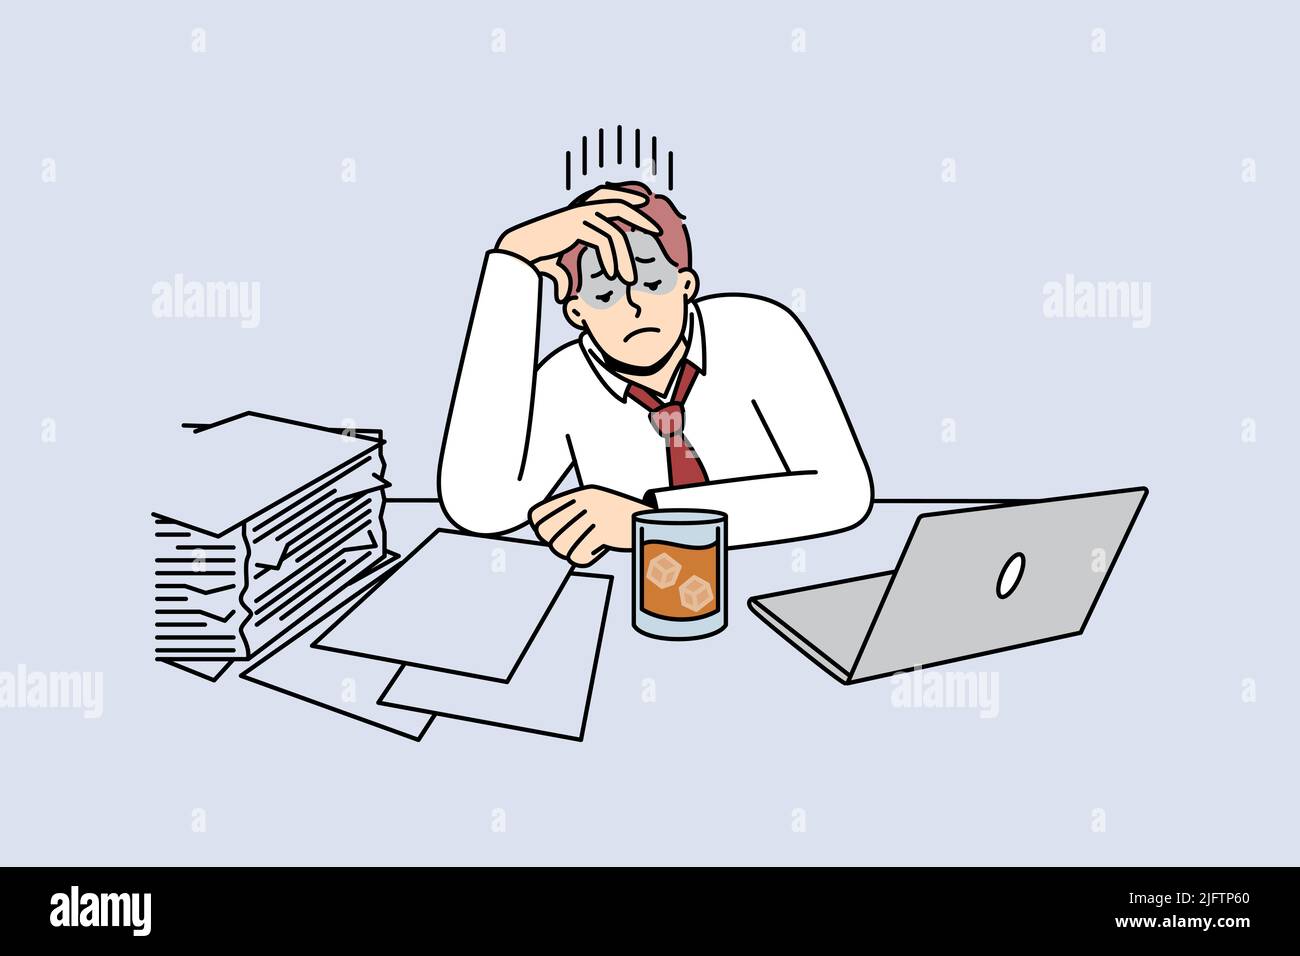 Tired businessman with glass of whiskey on table suffer from job burnout. Male journalist or editor feel stressed overwhelmed with work. Vector illustration.  Stock Vector